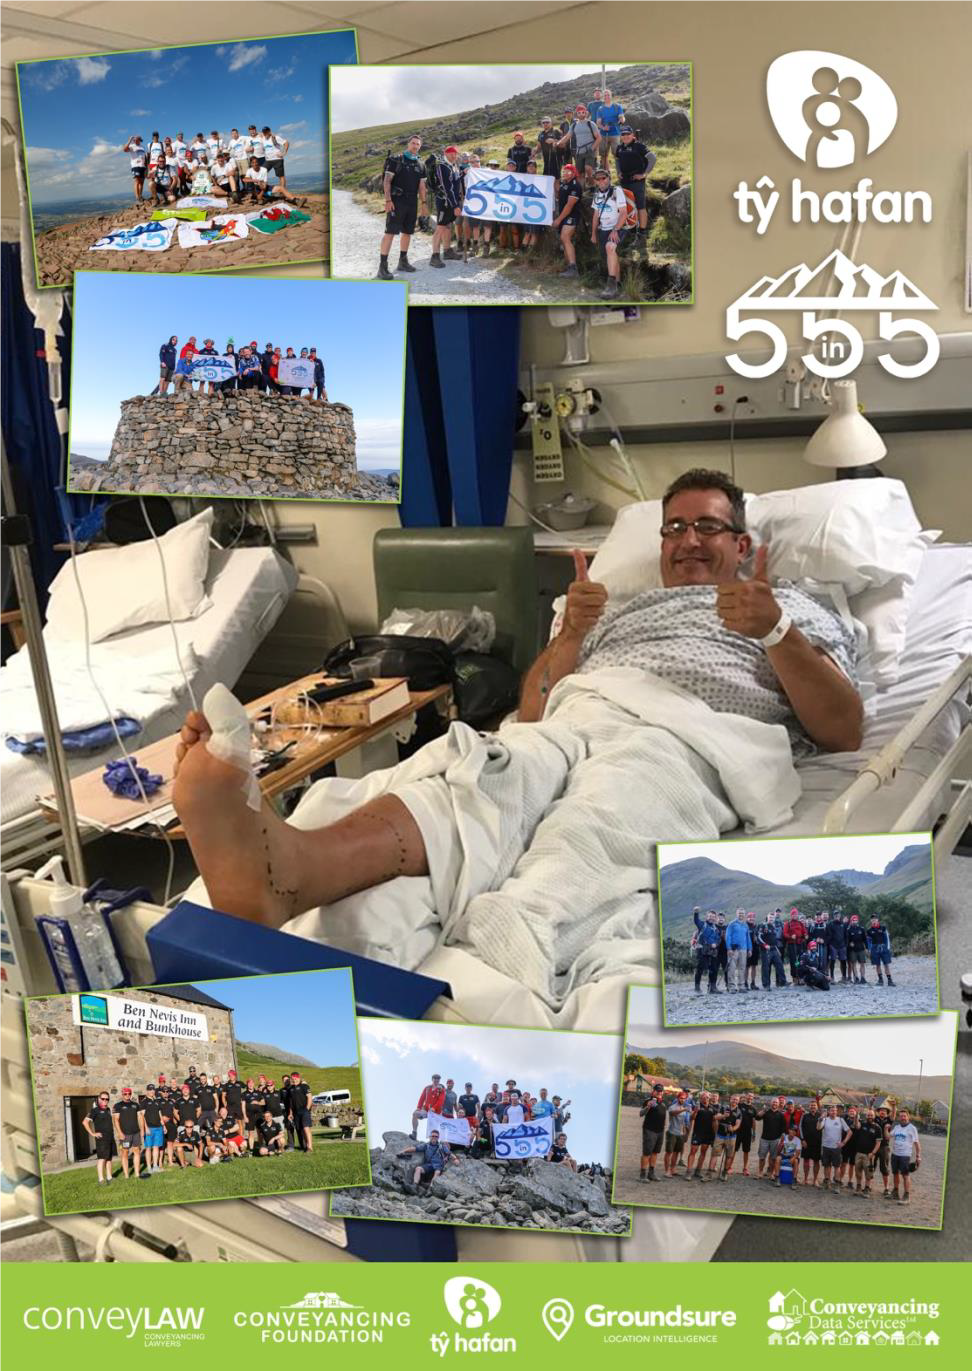 CA Operations Director, Lloyd Davies, hospitalised after 5 in 55 mountaineering Charity challenge